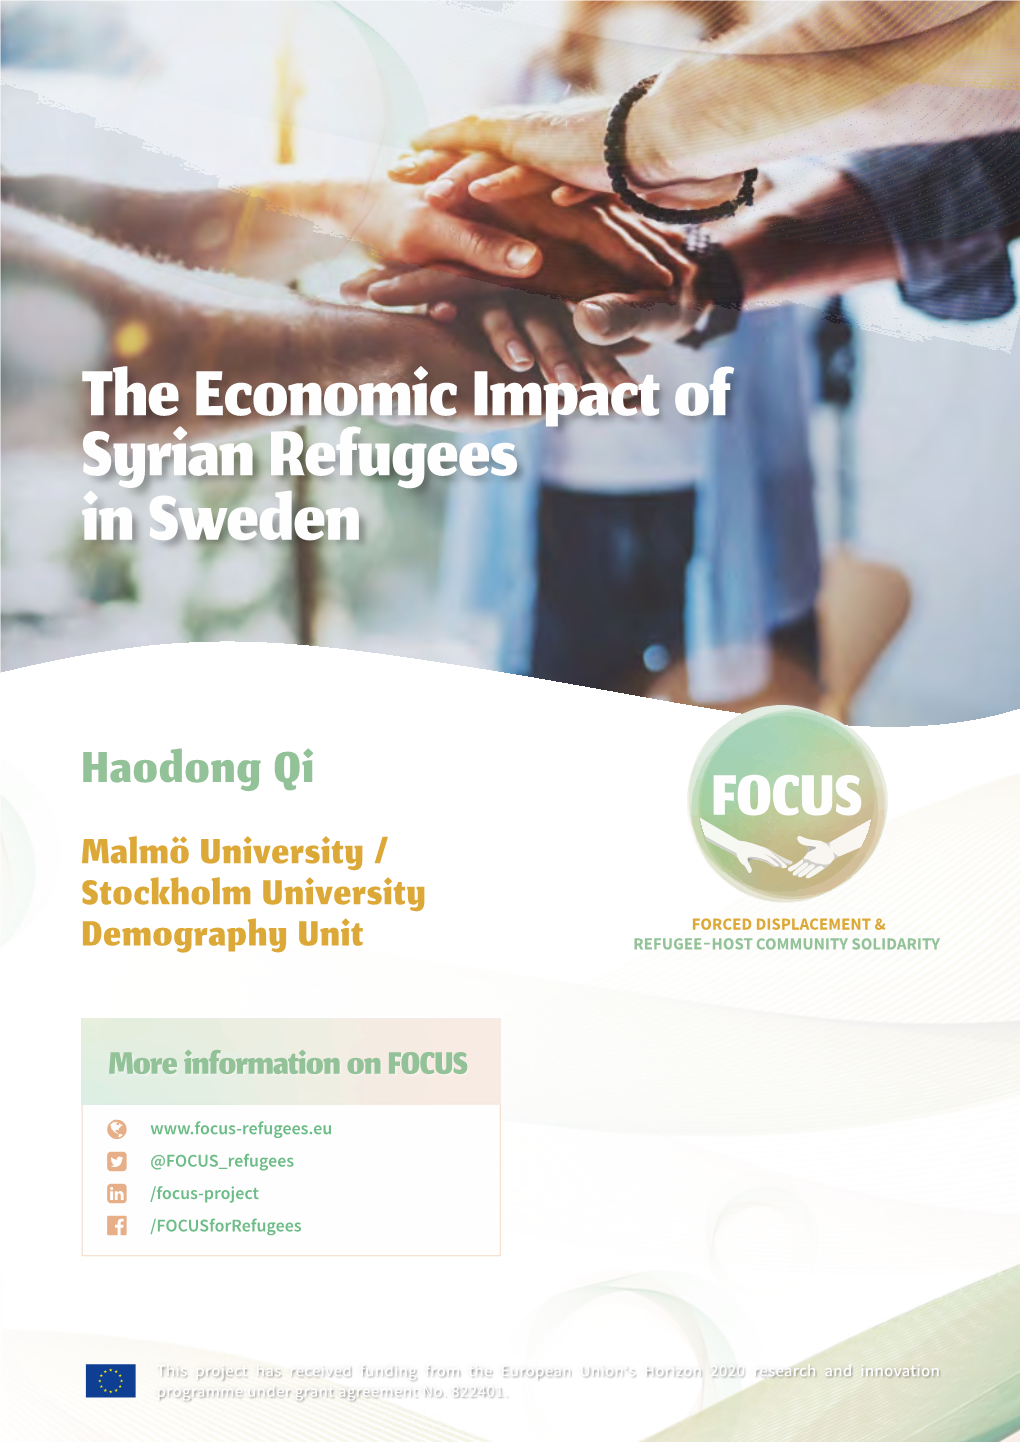 The Economic Impact of Syrian Refugees in Sweden